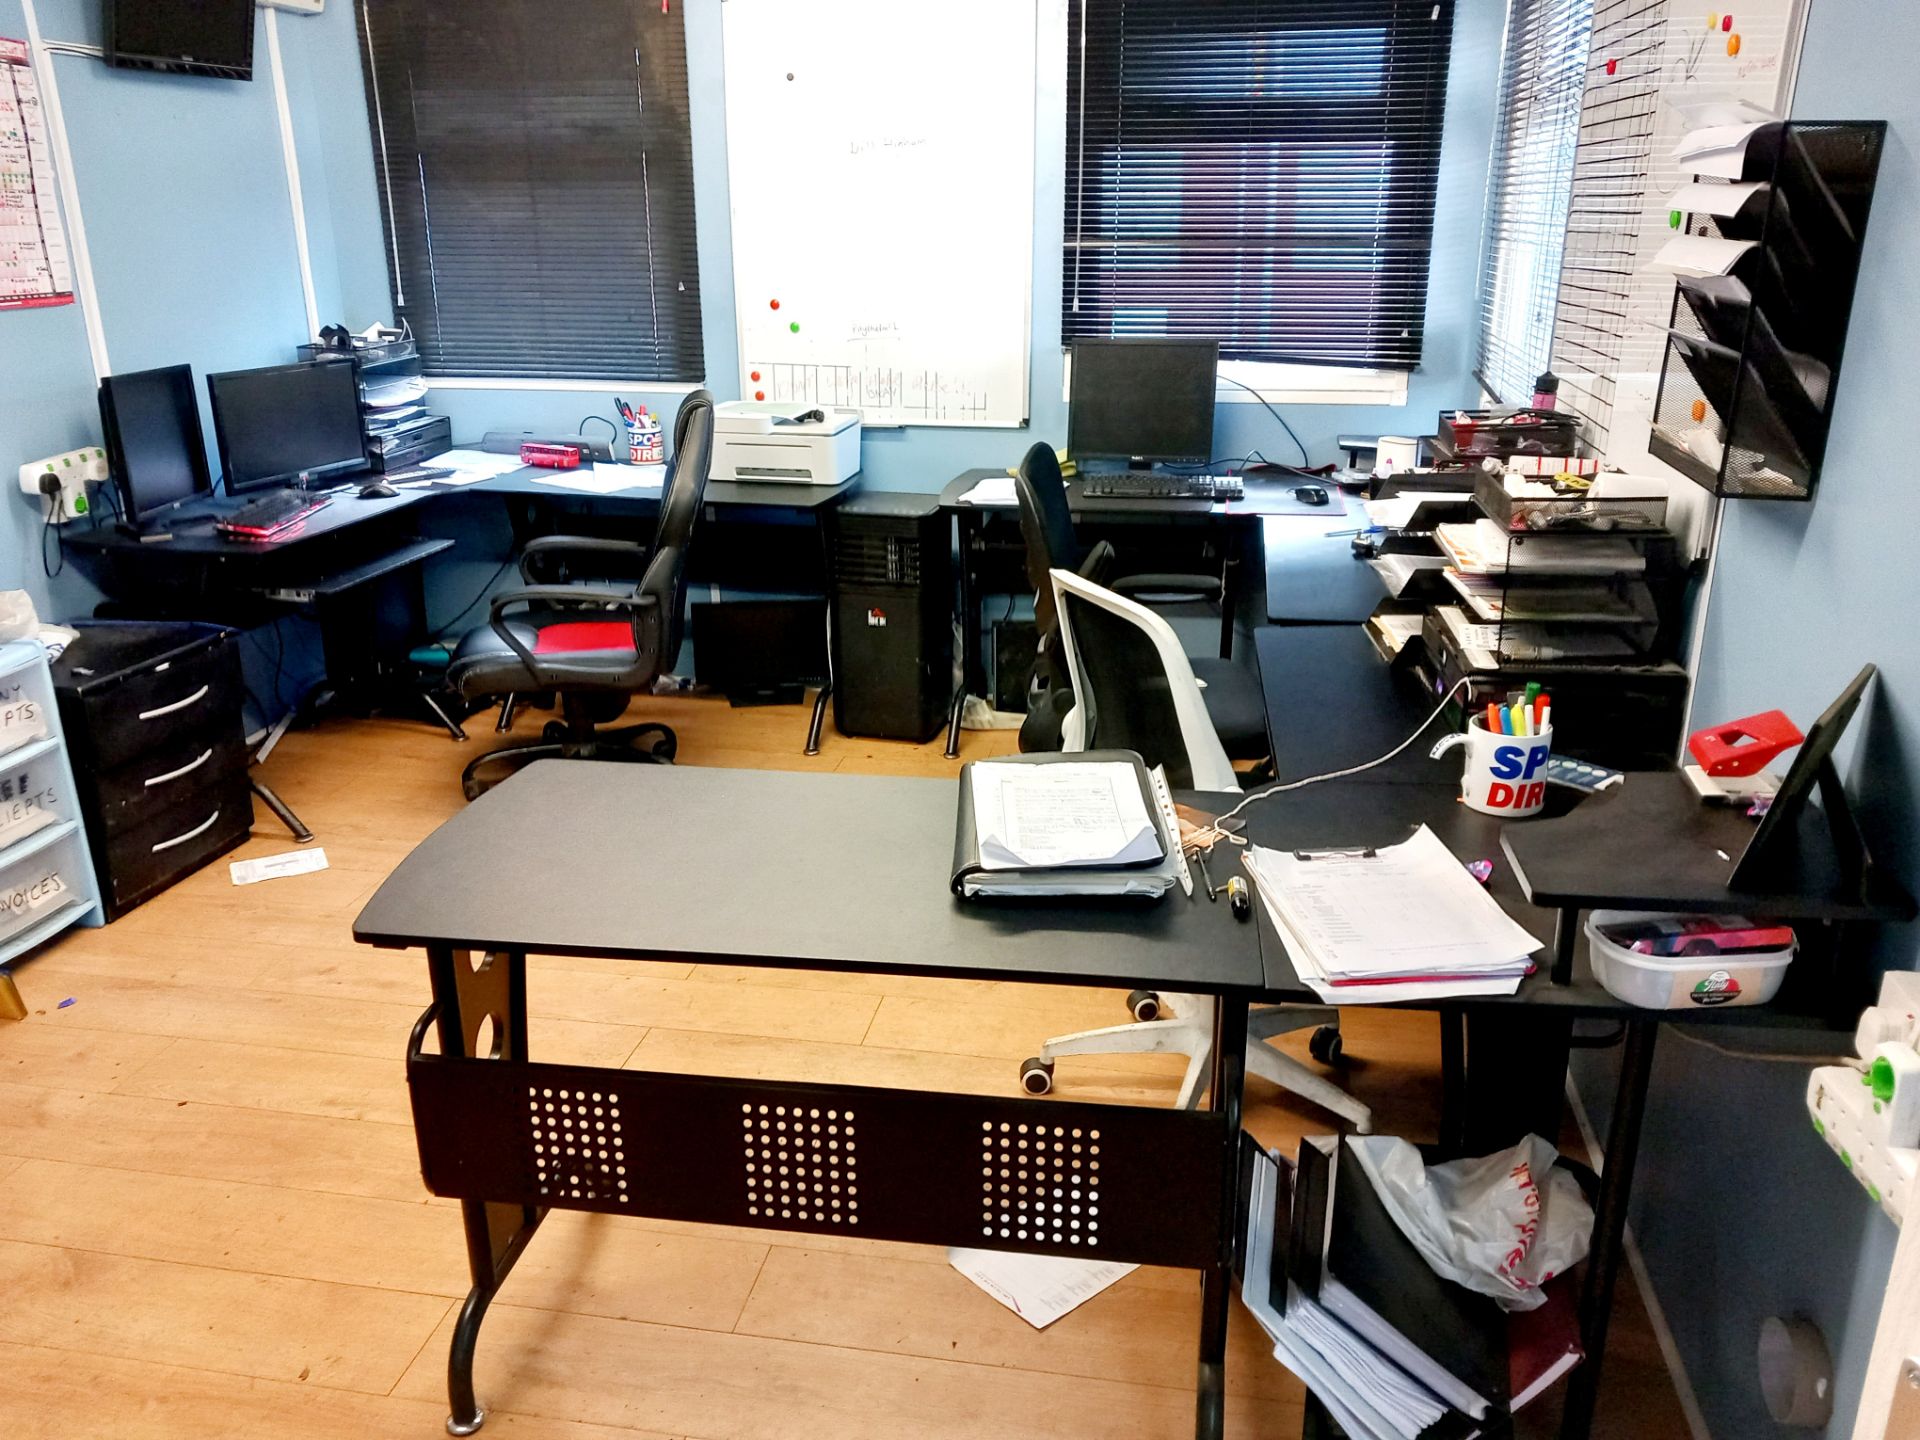 Office furniture to room to include 3 x corner desks, 3 x office chairs, 2 x filing cabinets, 6ft